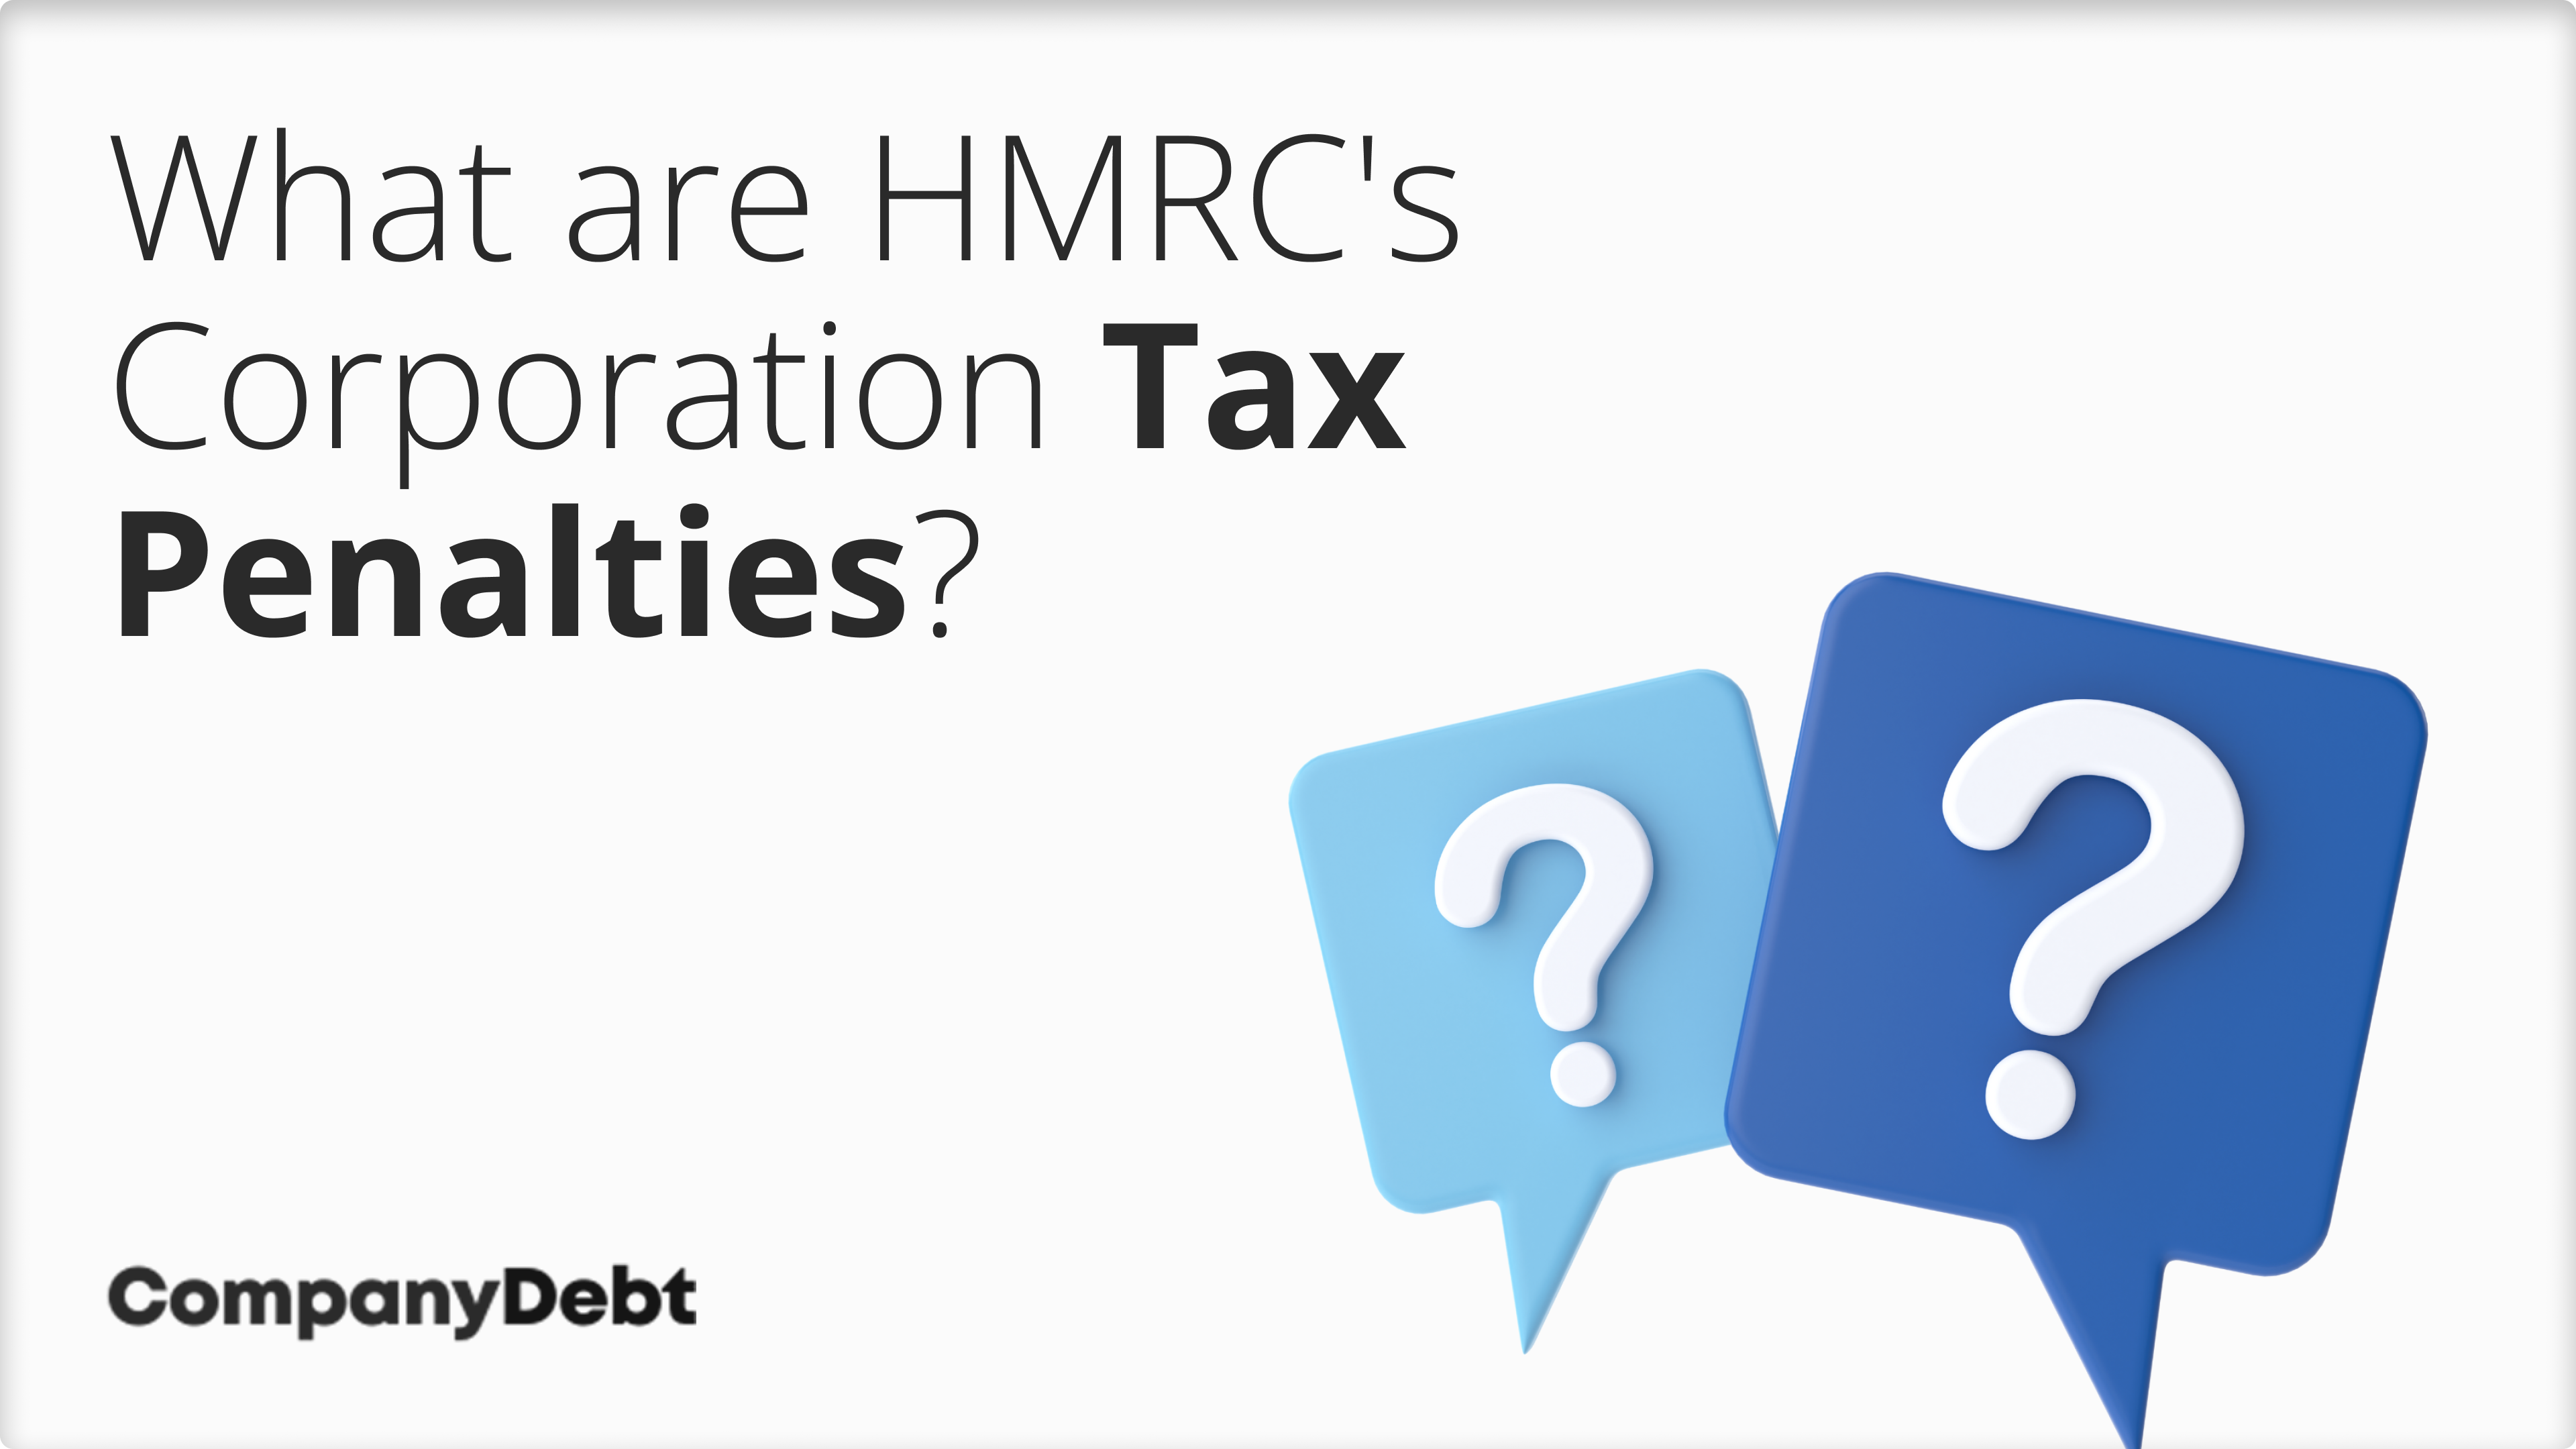 What are HMRC's Corporation Tax Penalties?